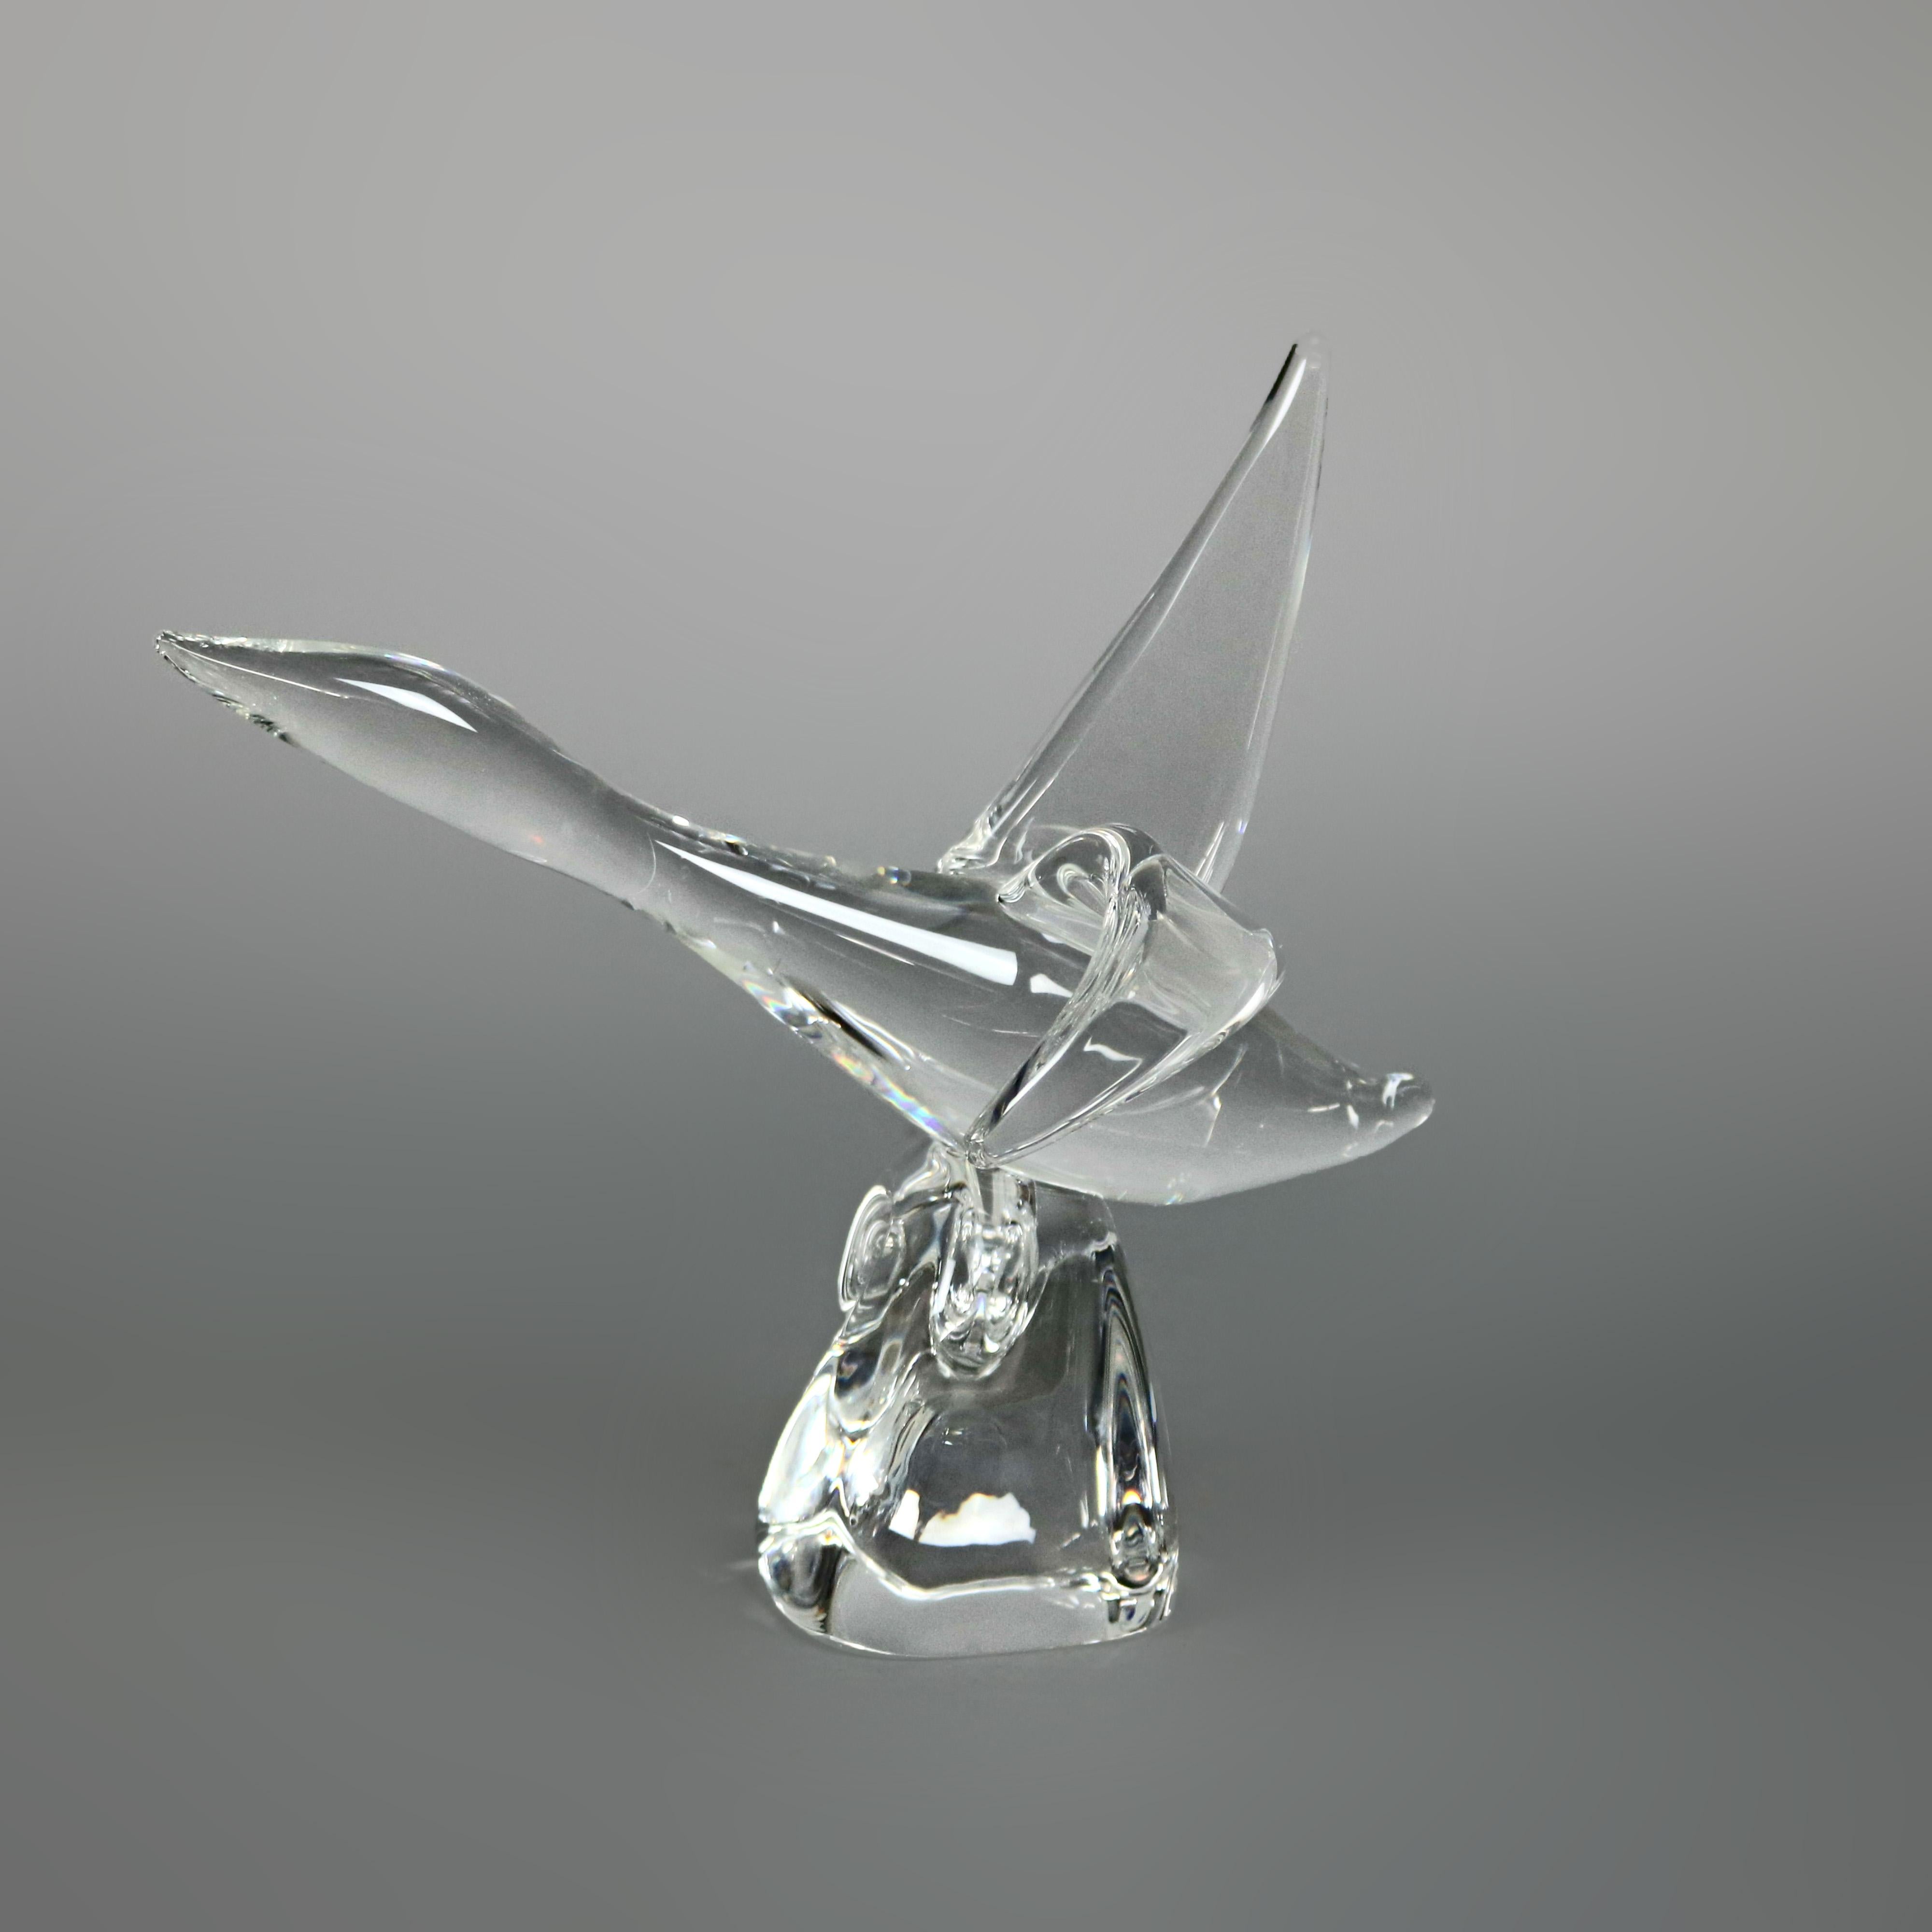 Midcentury Modern Steuben figurative mouth blown crystal sculptural paperweight features colorless art glass in full body form of a Canadian Goose in flight over wave, designed by Lloyd Atkins, 1960 for Corning Museum of Glass, New York, NY,